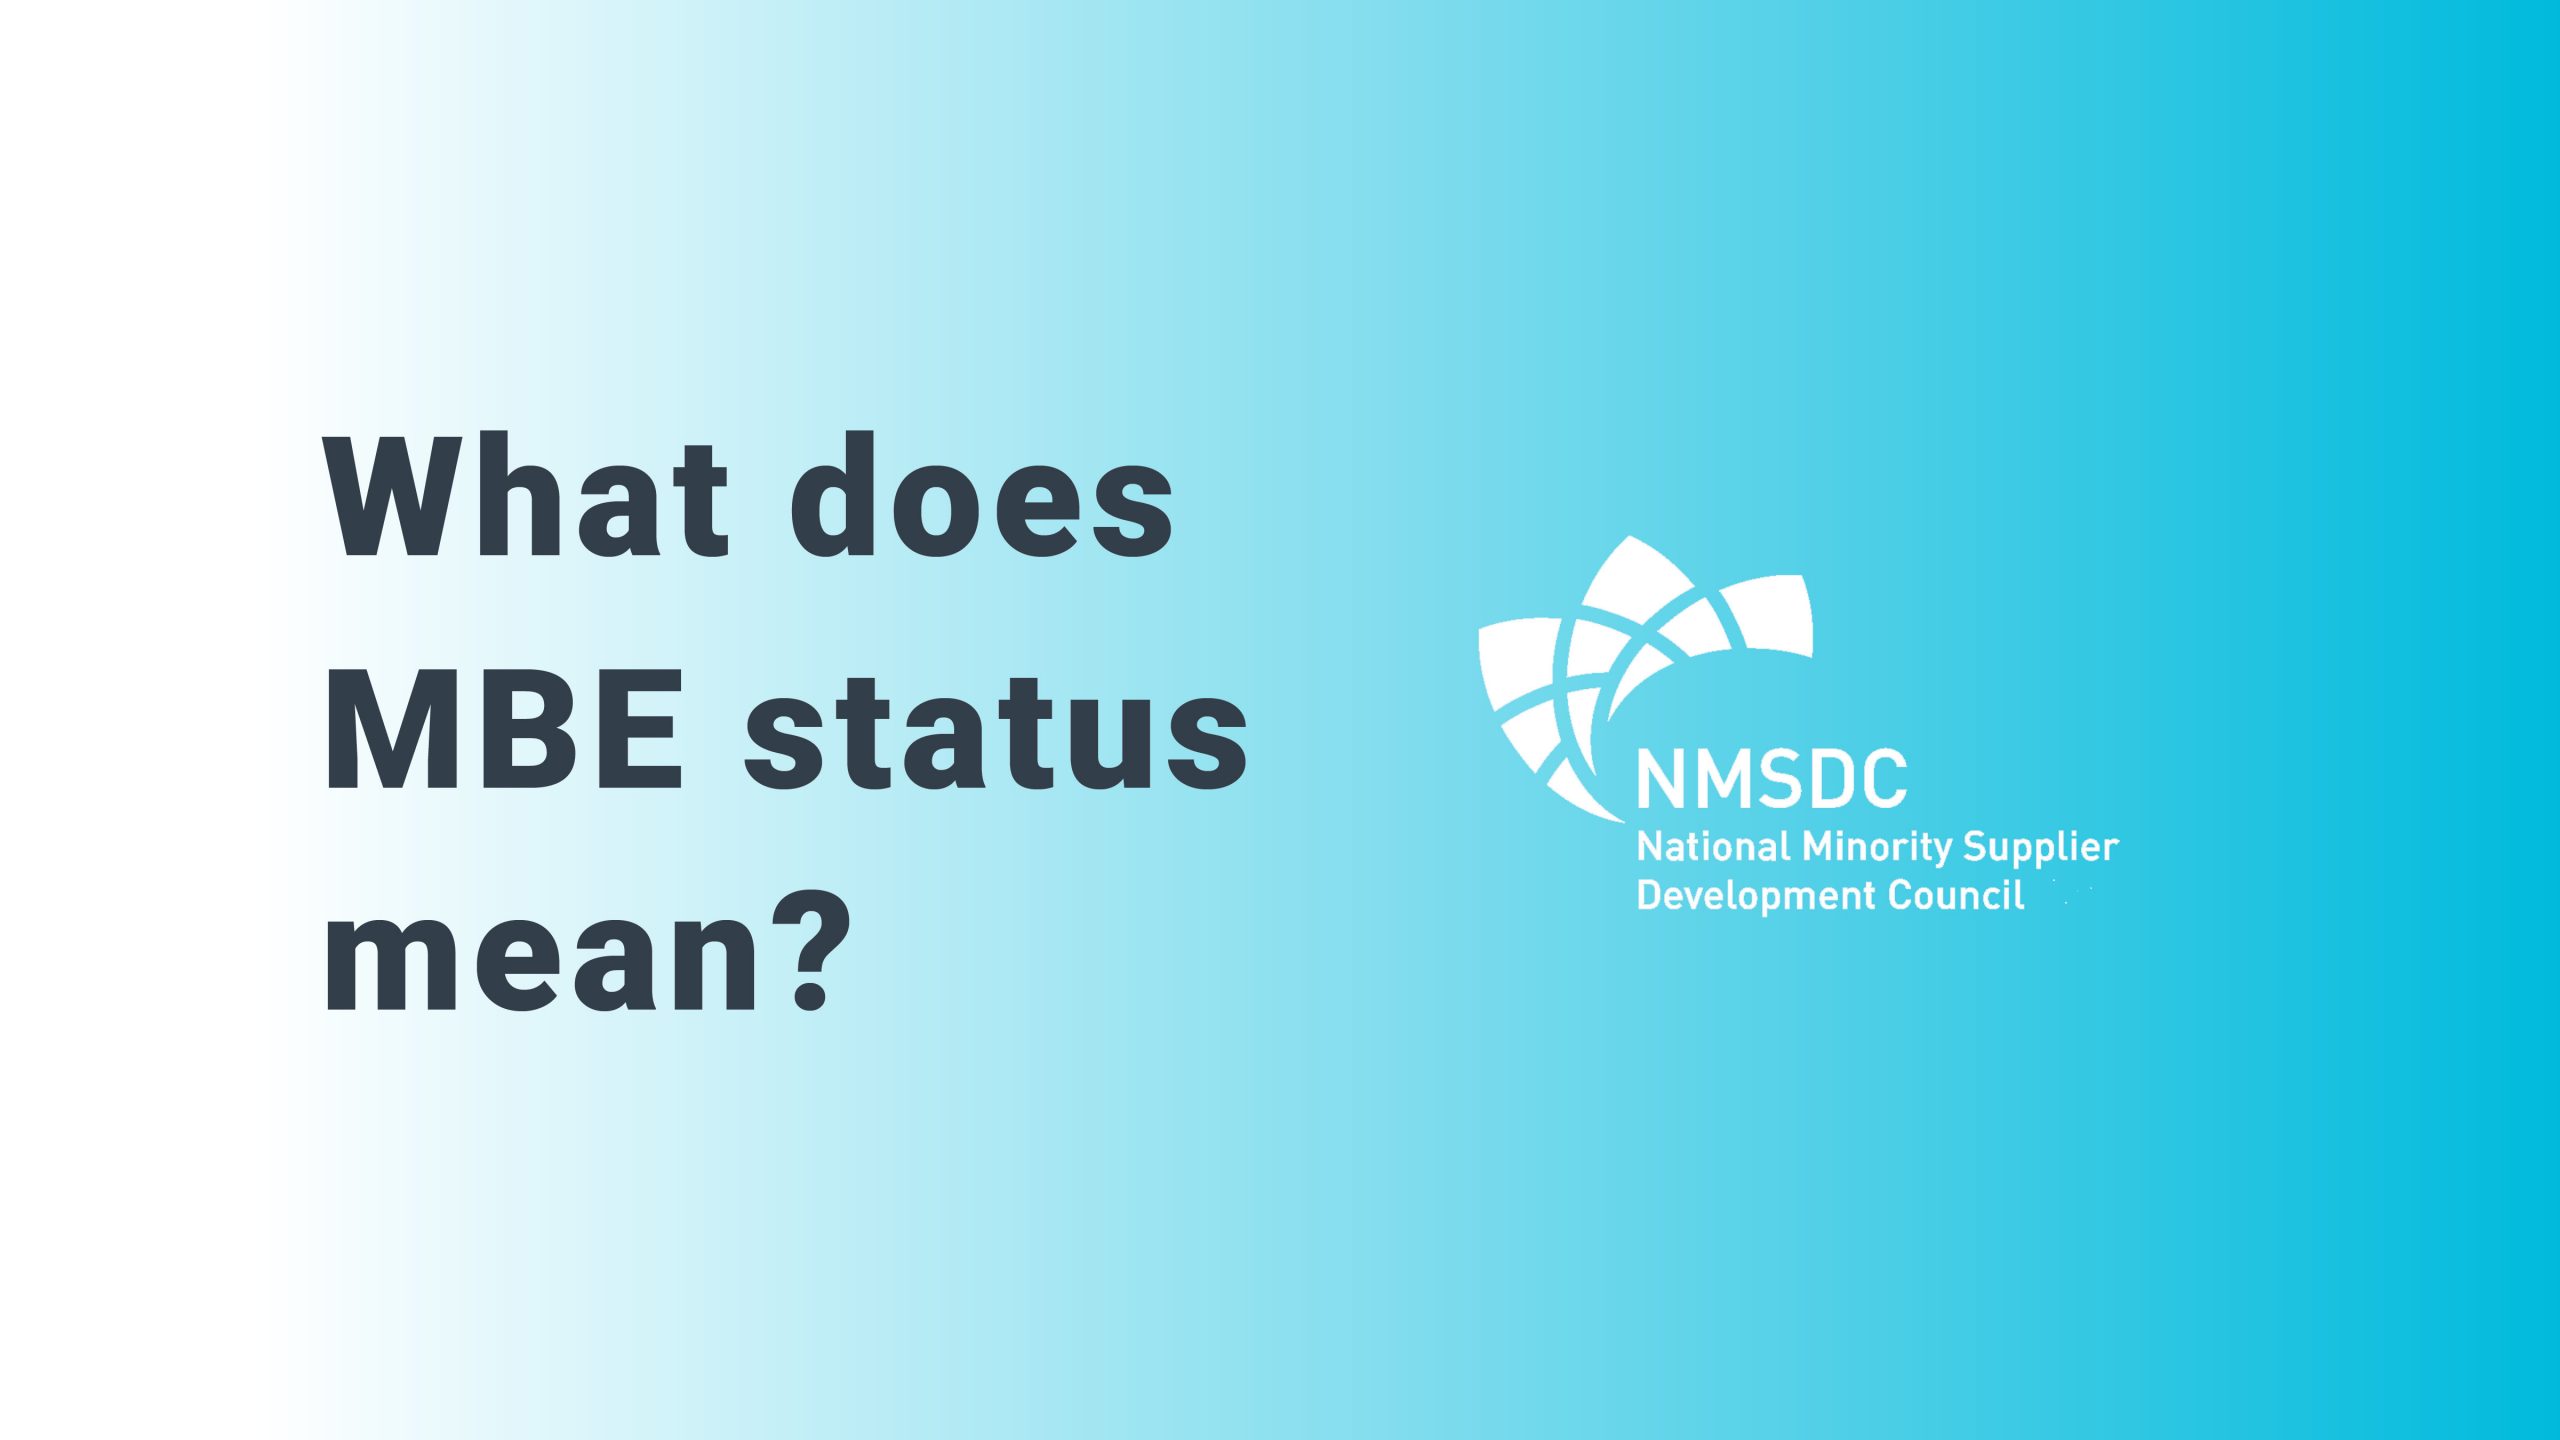 What does MBE status mean?